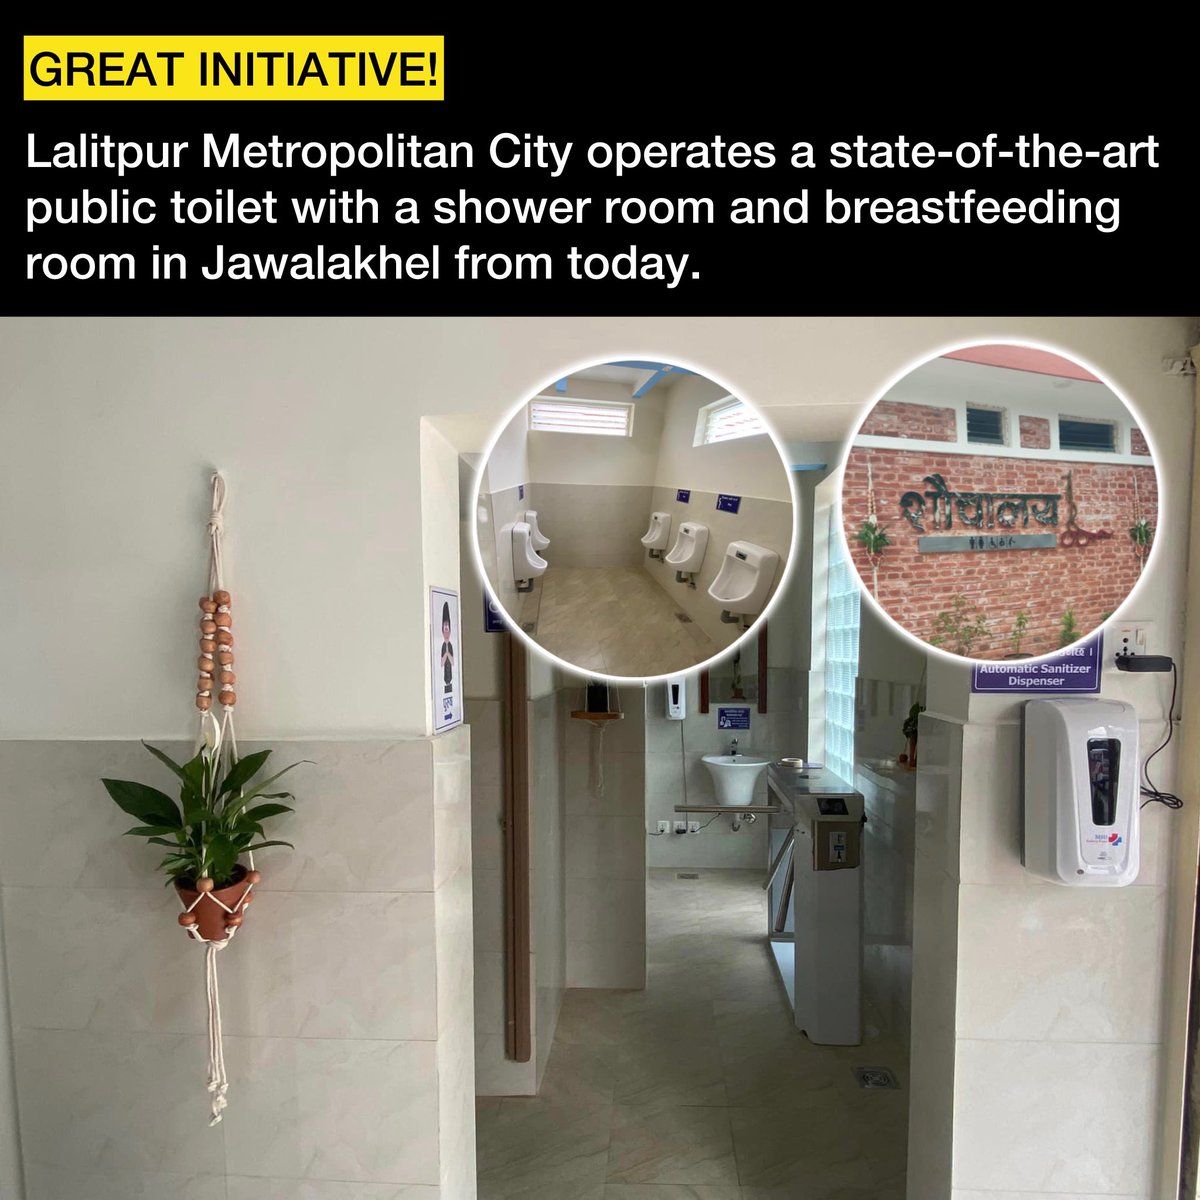 GREAT INITIATE: Lalitpur Metropolitan City has opened a state-of-the-art public toilet with a shower room and breastfeeding room in Jawalakhel from today. Mayor Chiribabu Maharjan inaugurated the toilet which was built at a cost of Rs 1 crore 8 lakh.

#lalitpur #jawalakhel